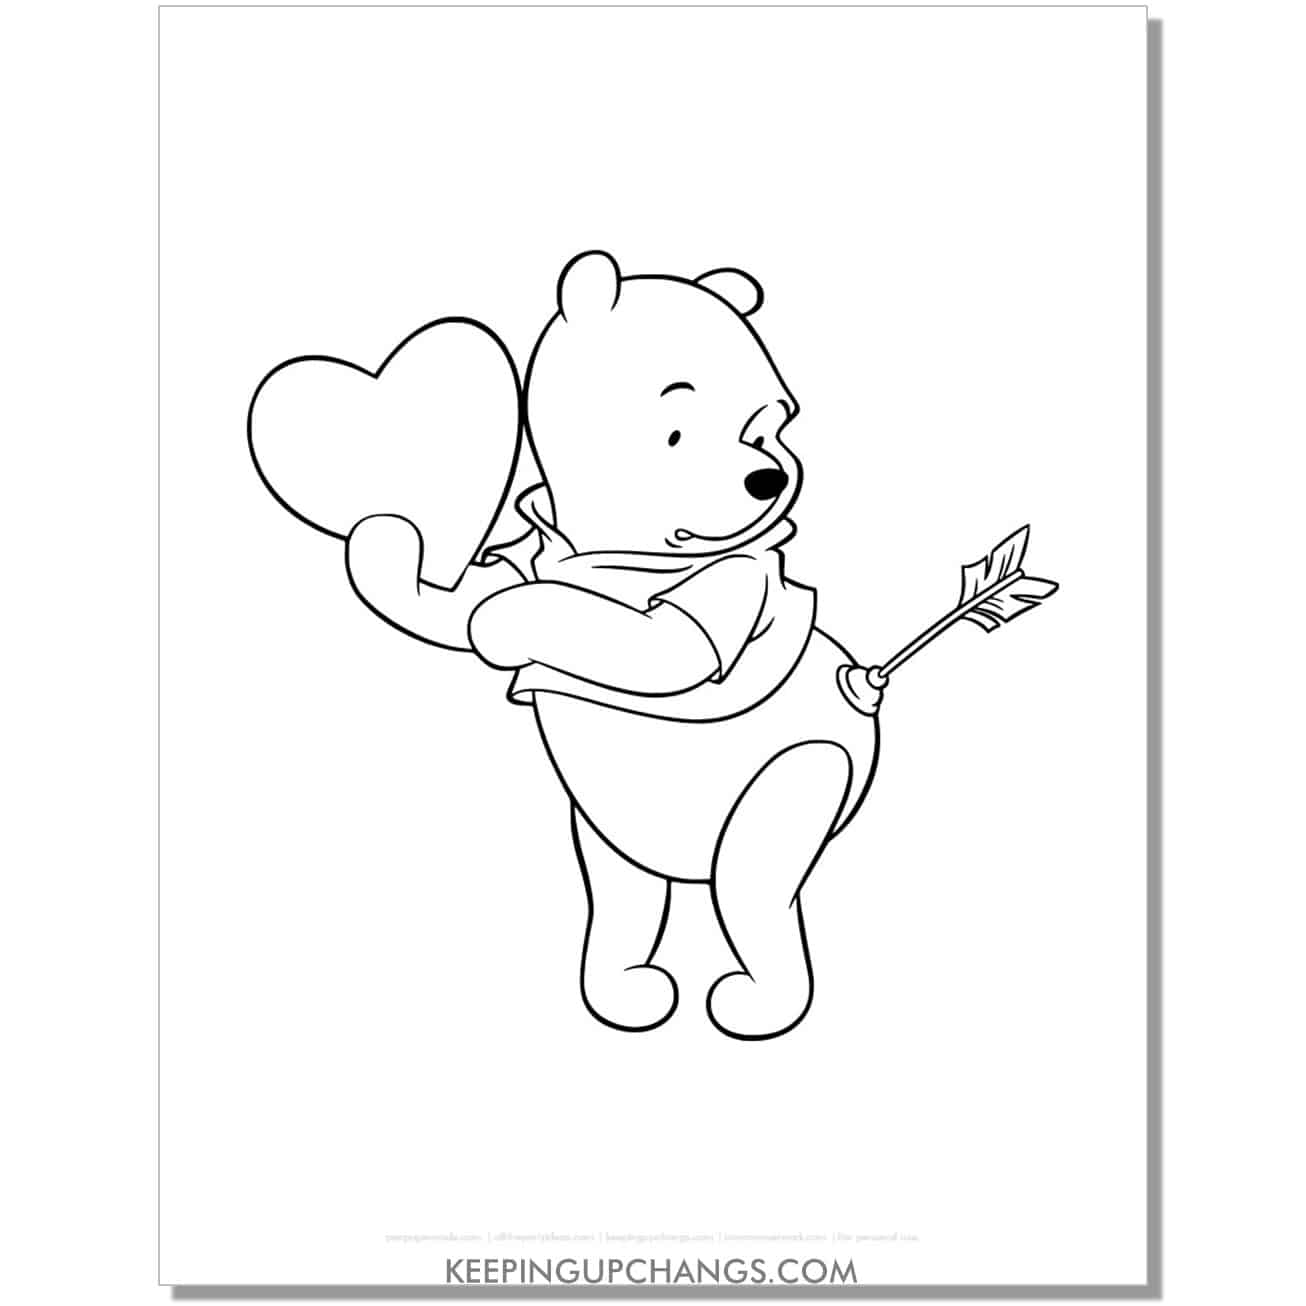 winnie the pooh hit by cupid's arrow and holding a heart coloring page, sheet.